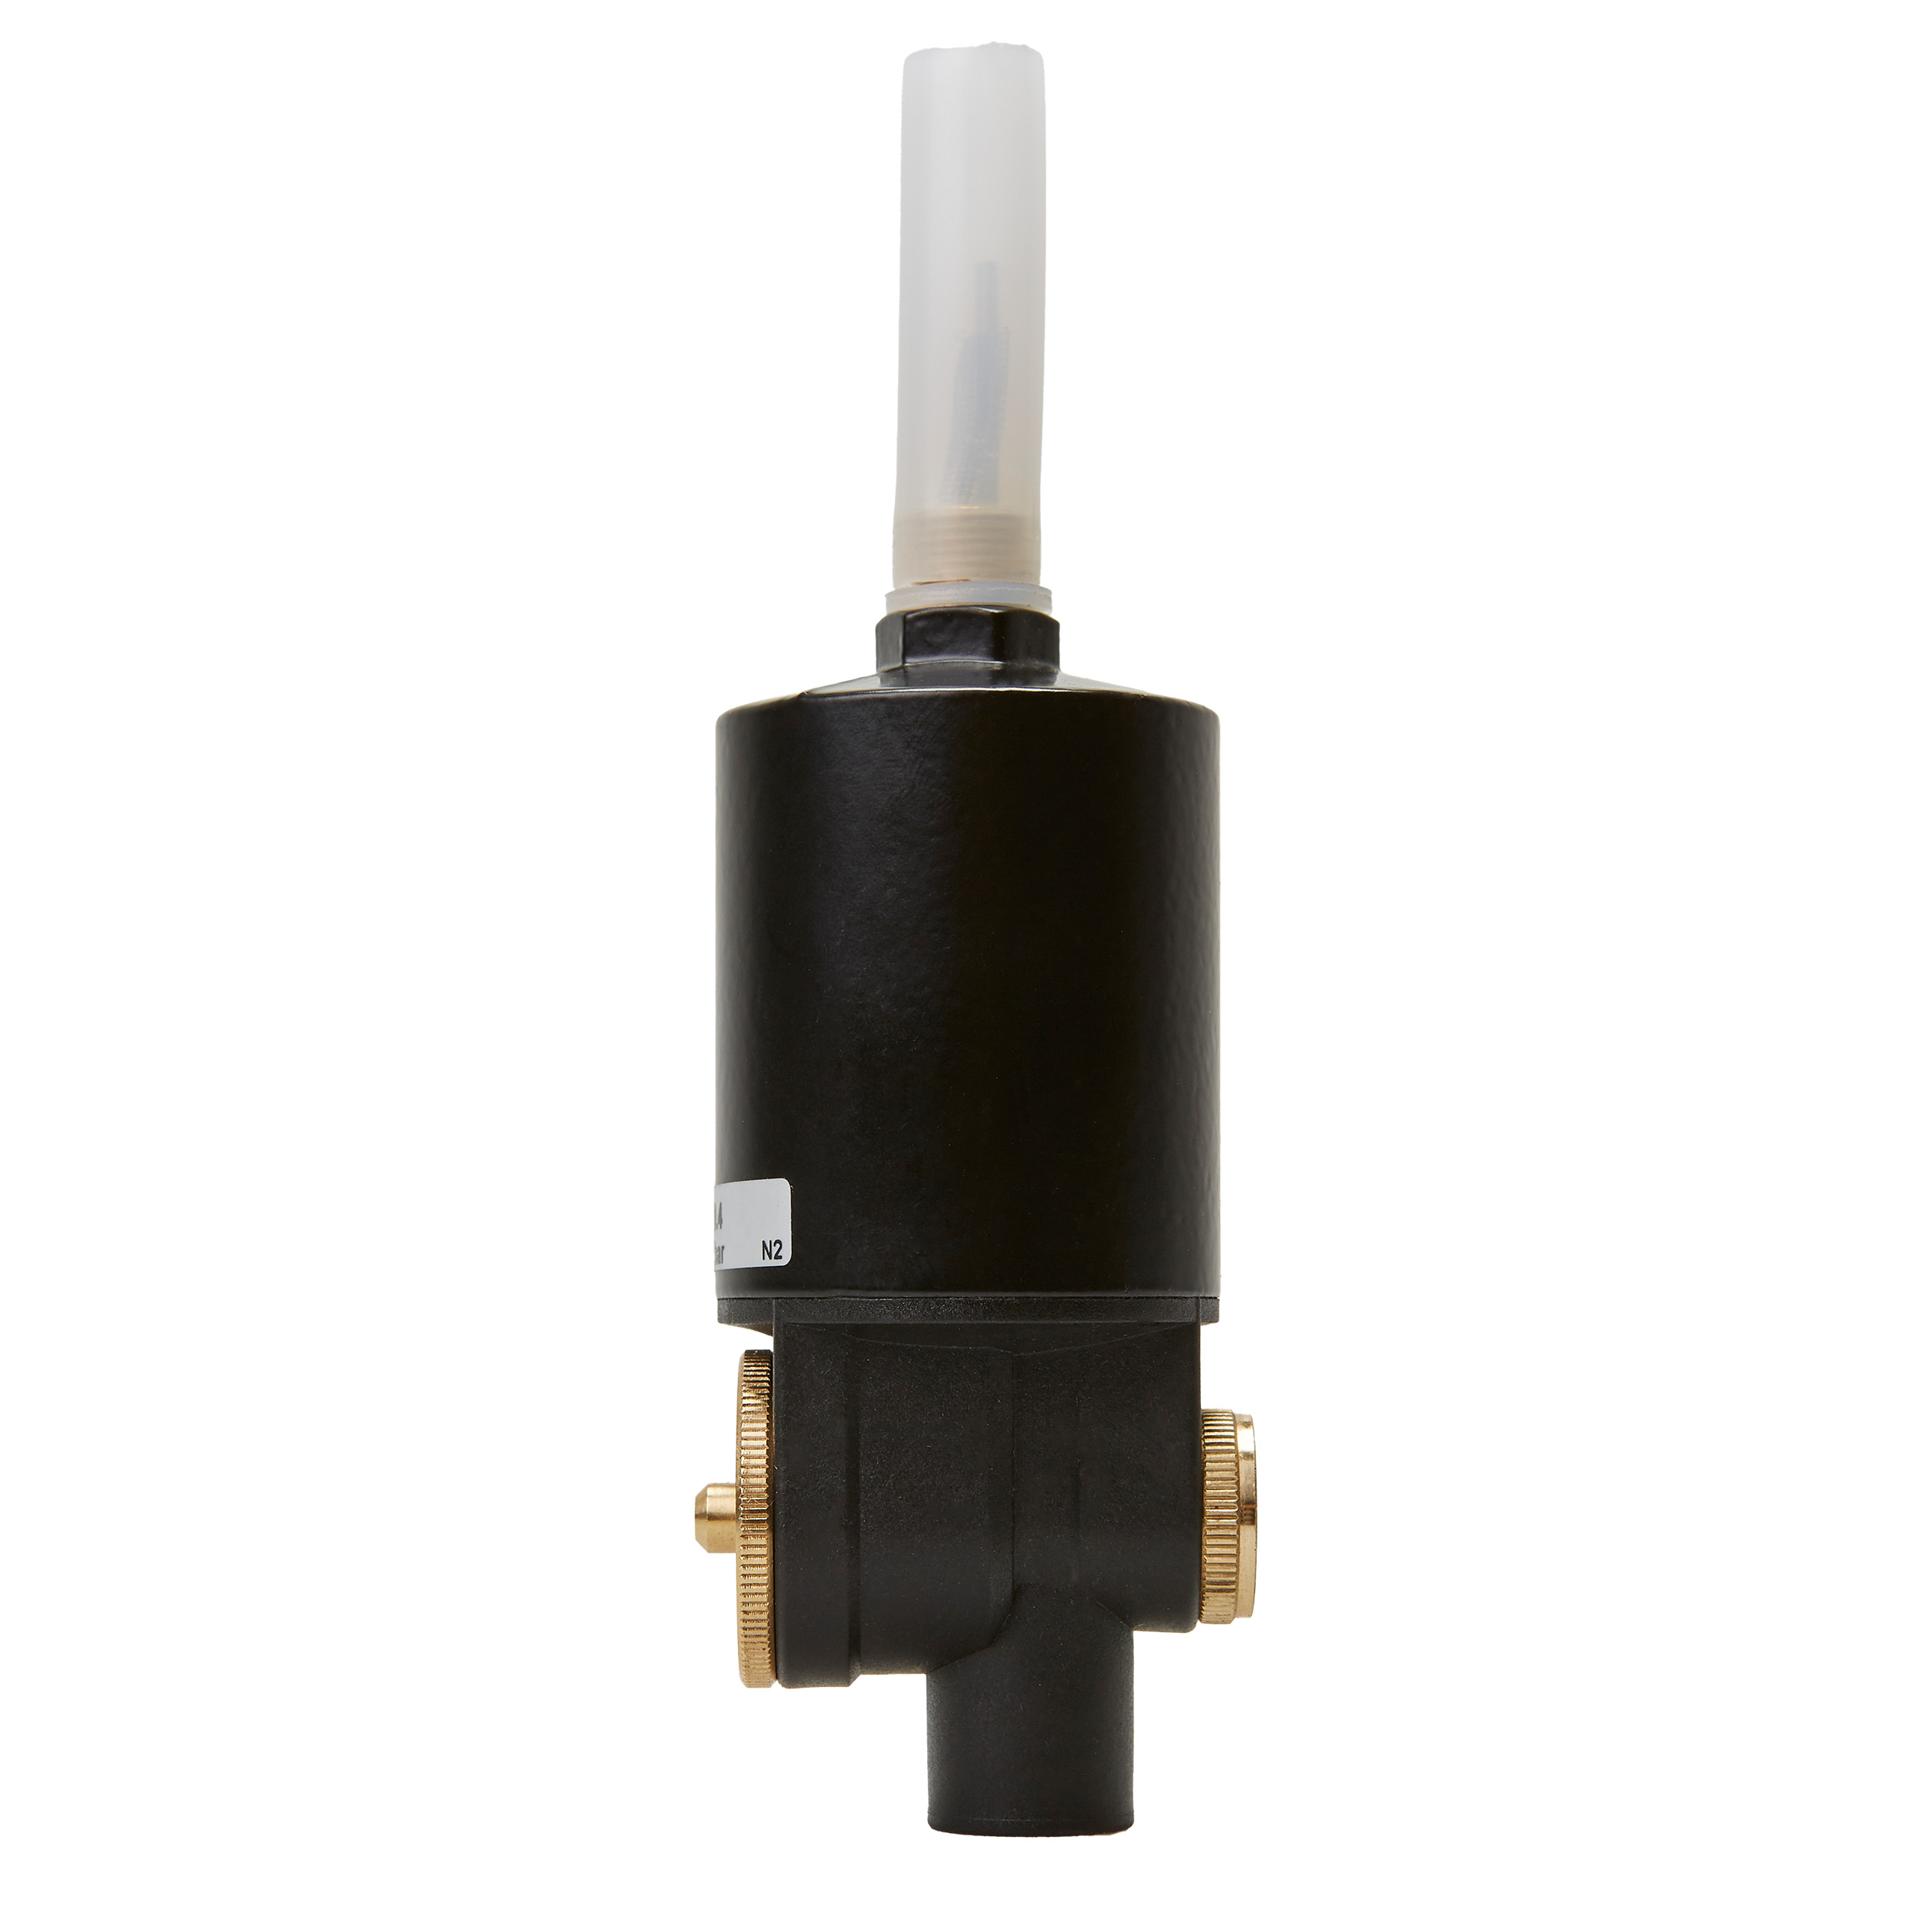 Auto. attachable drain valve A, PA-housing/brass cover, max.-Ø42, L: 129 mm, G⅛, condens. drain: DN 4, condens. outlet: G¼ female